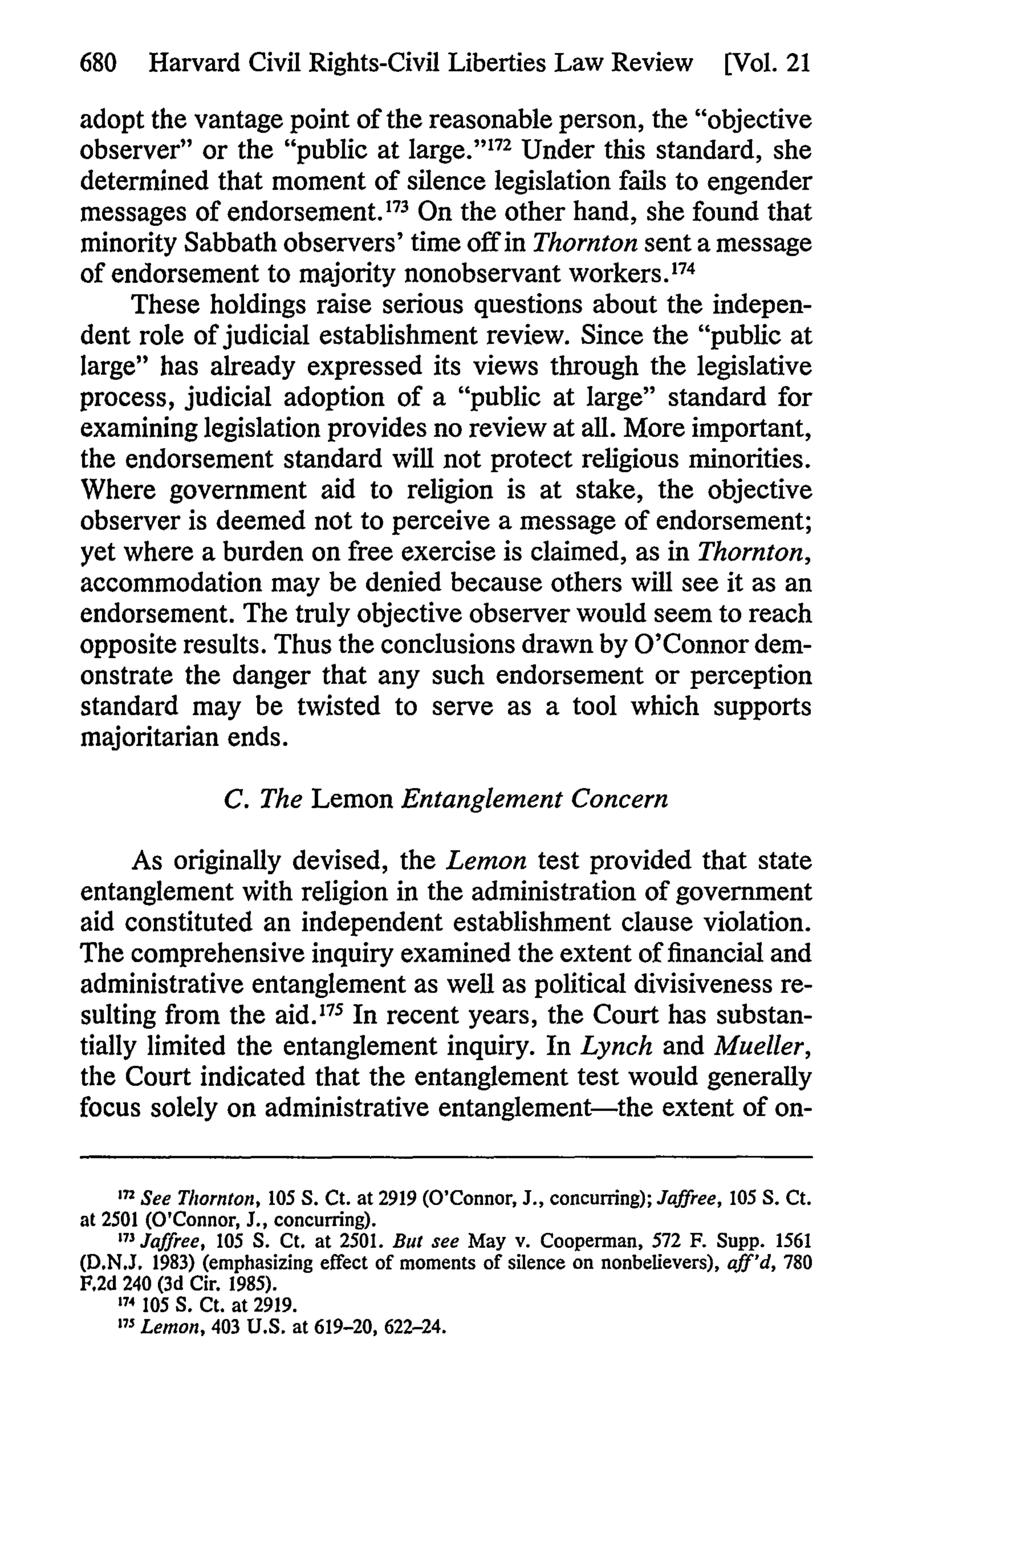 680 Harvard Civil Rights-Civil Liberties Law Review [Vol. 21 adopt the vantage point of the reasonable person, the "objective observer" or the "public at large.